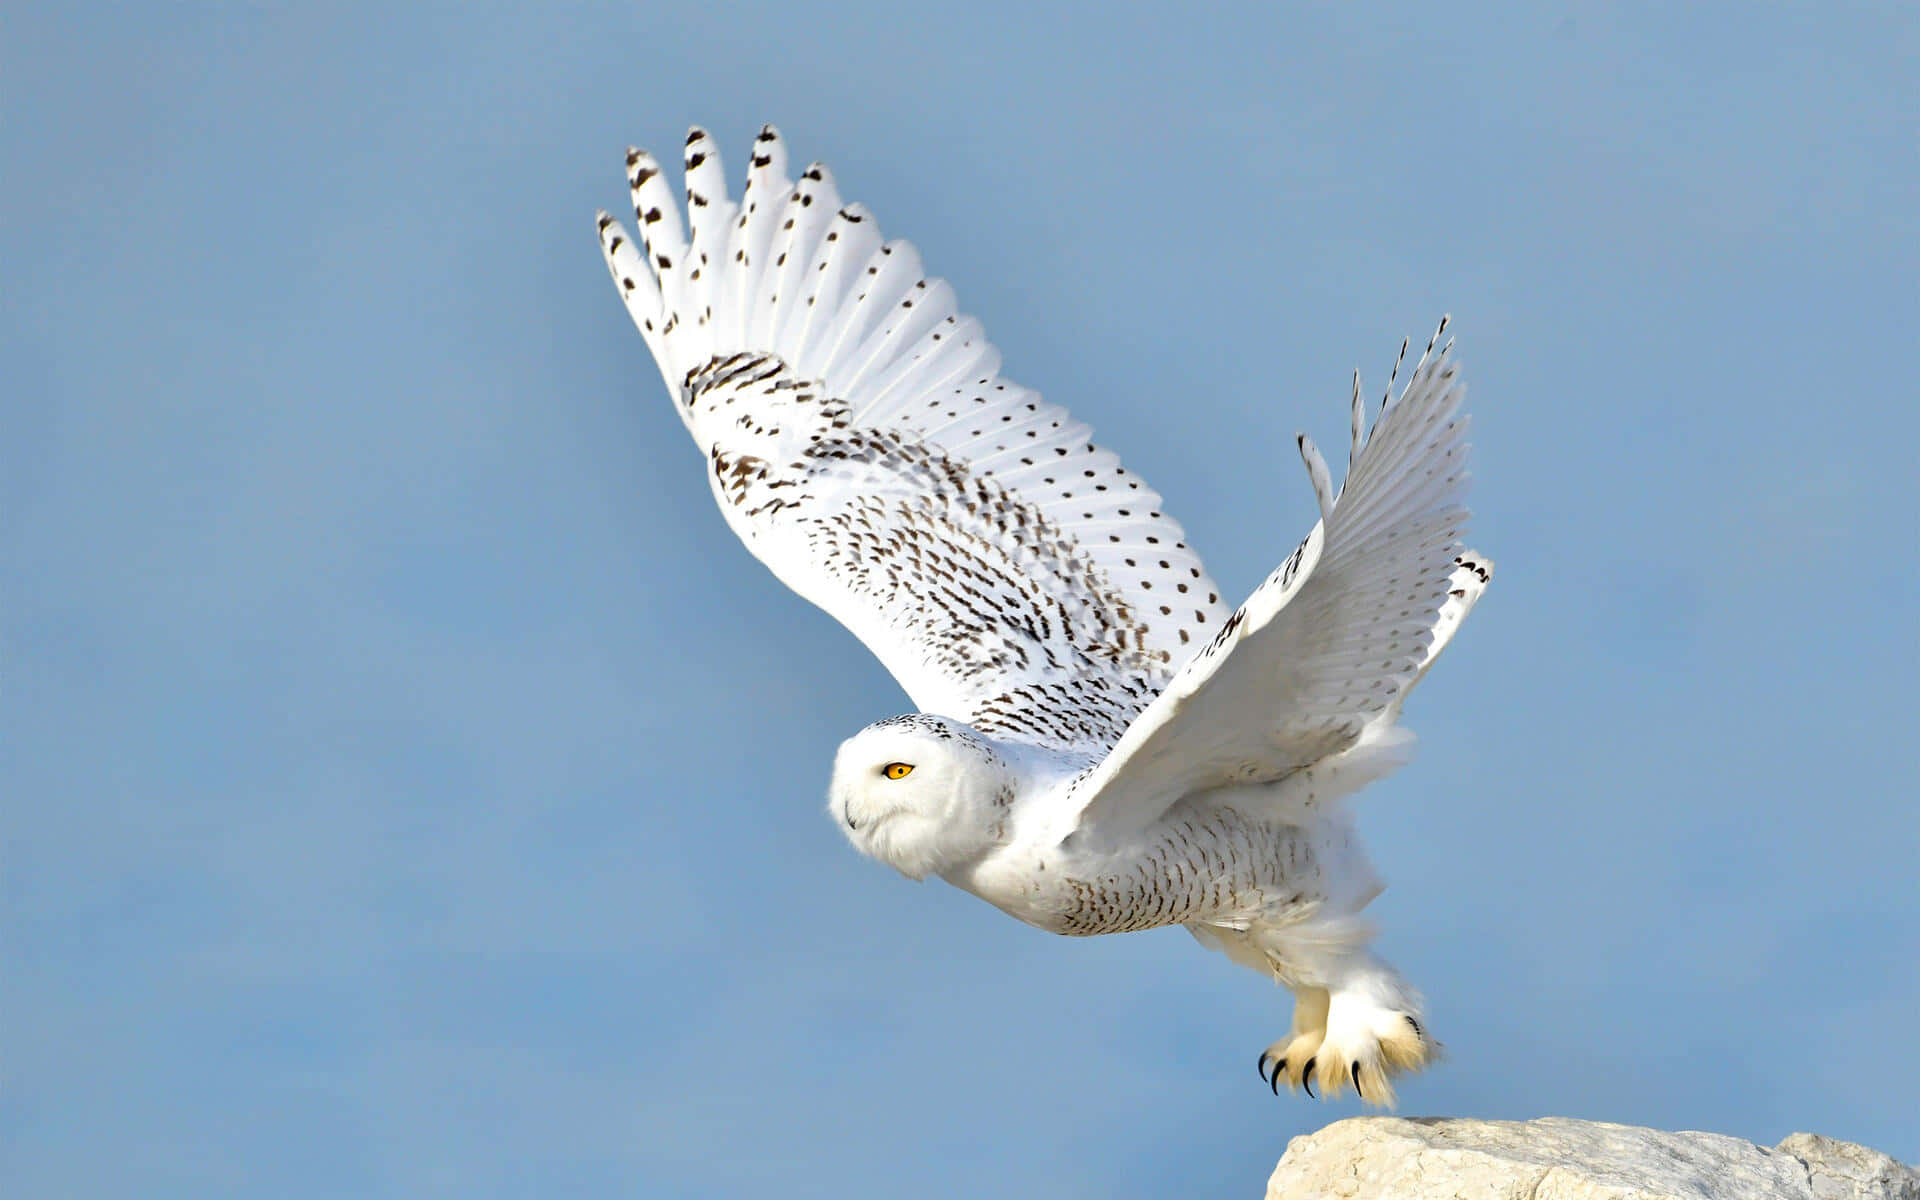 A snow-white Snowy Owl perched atop a rocky surface